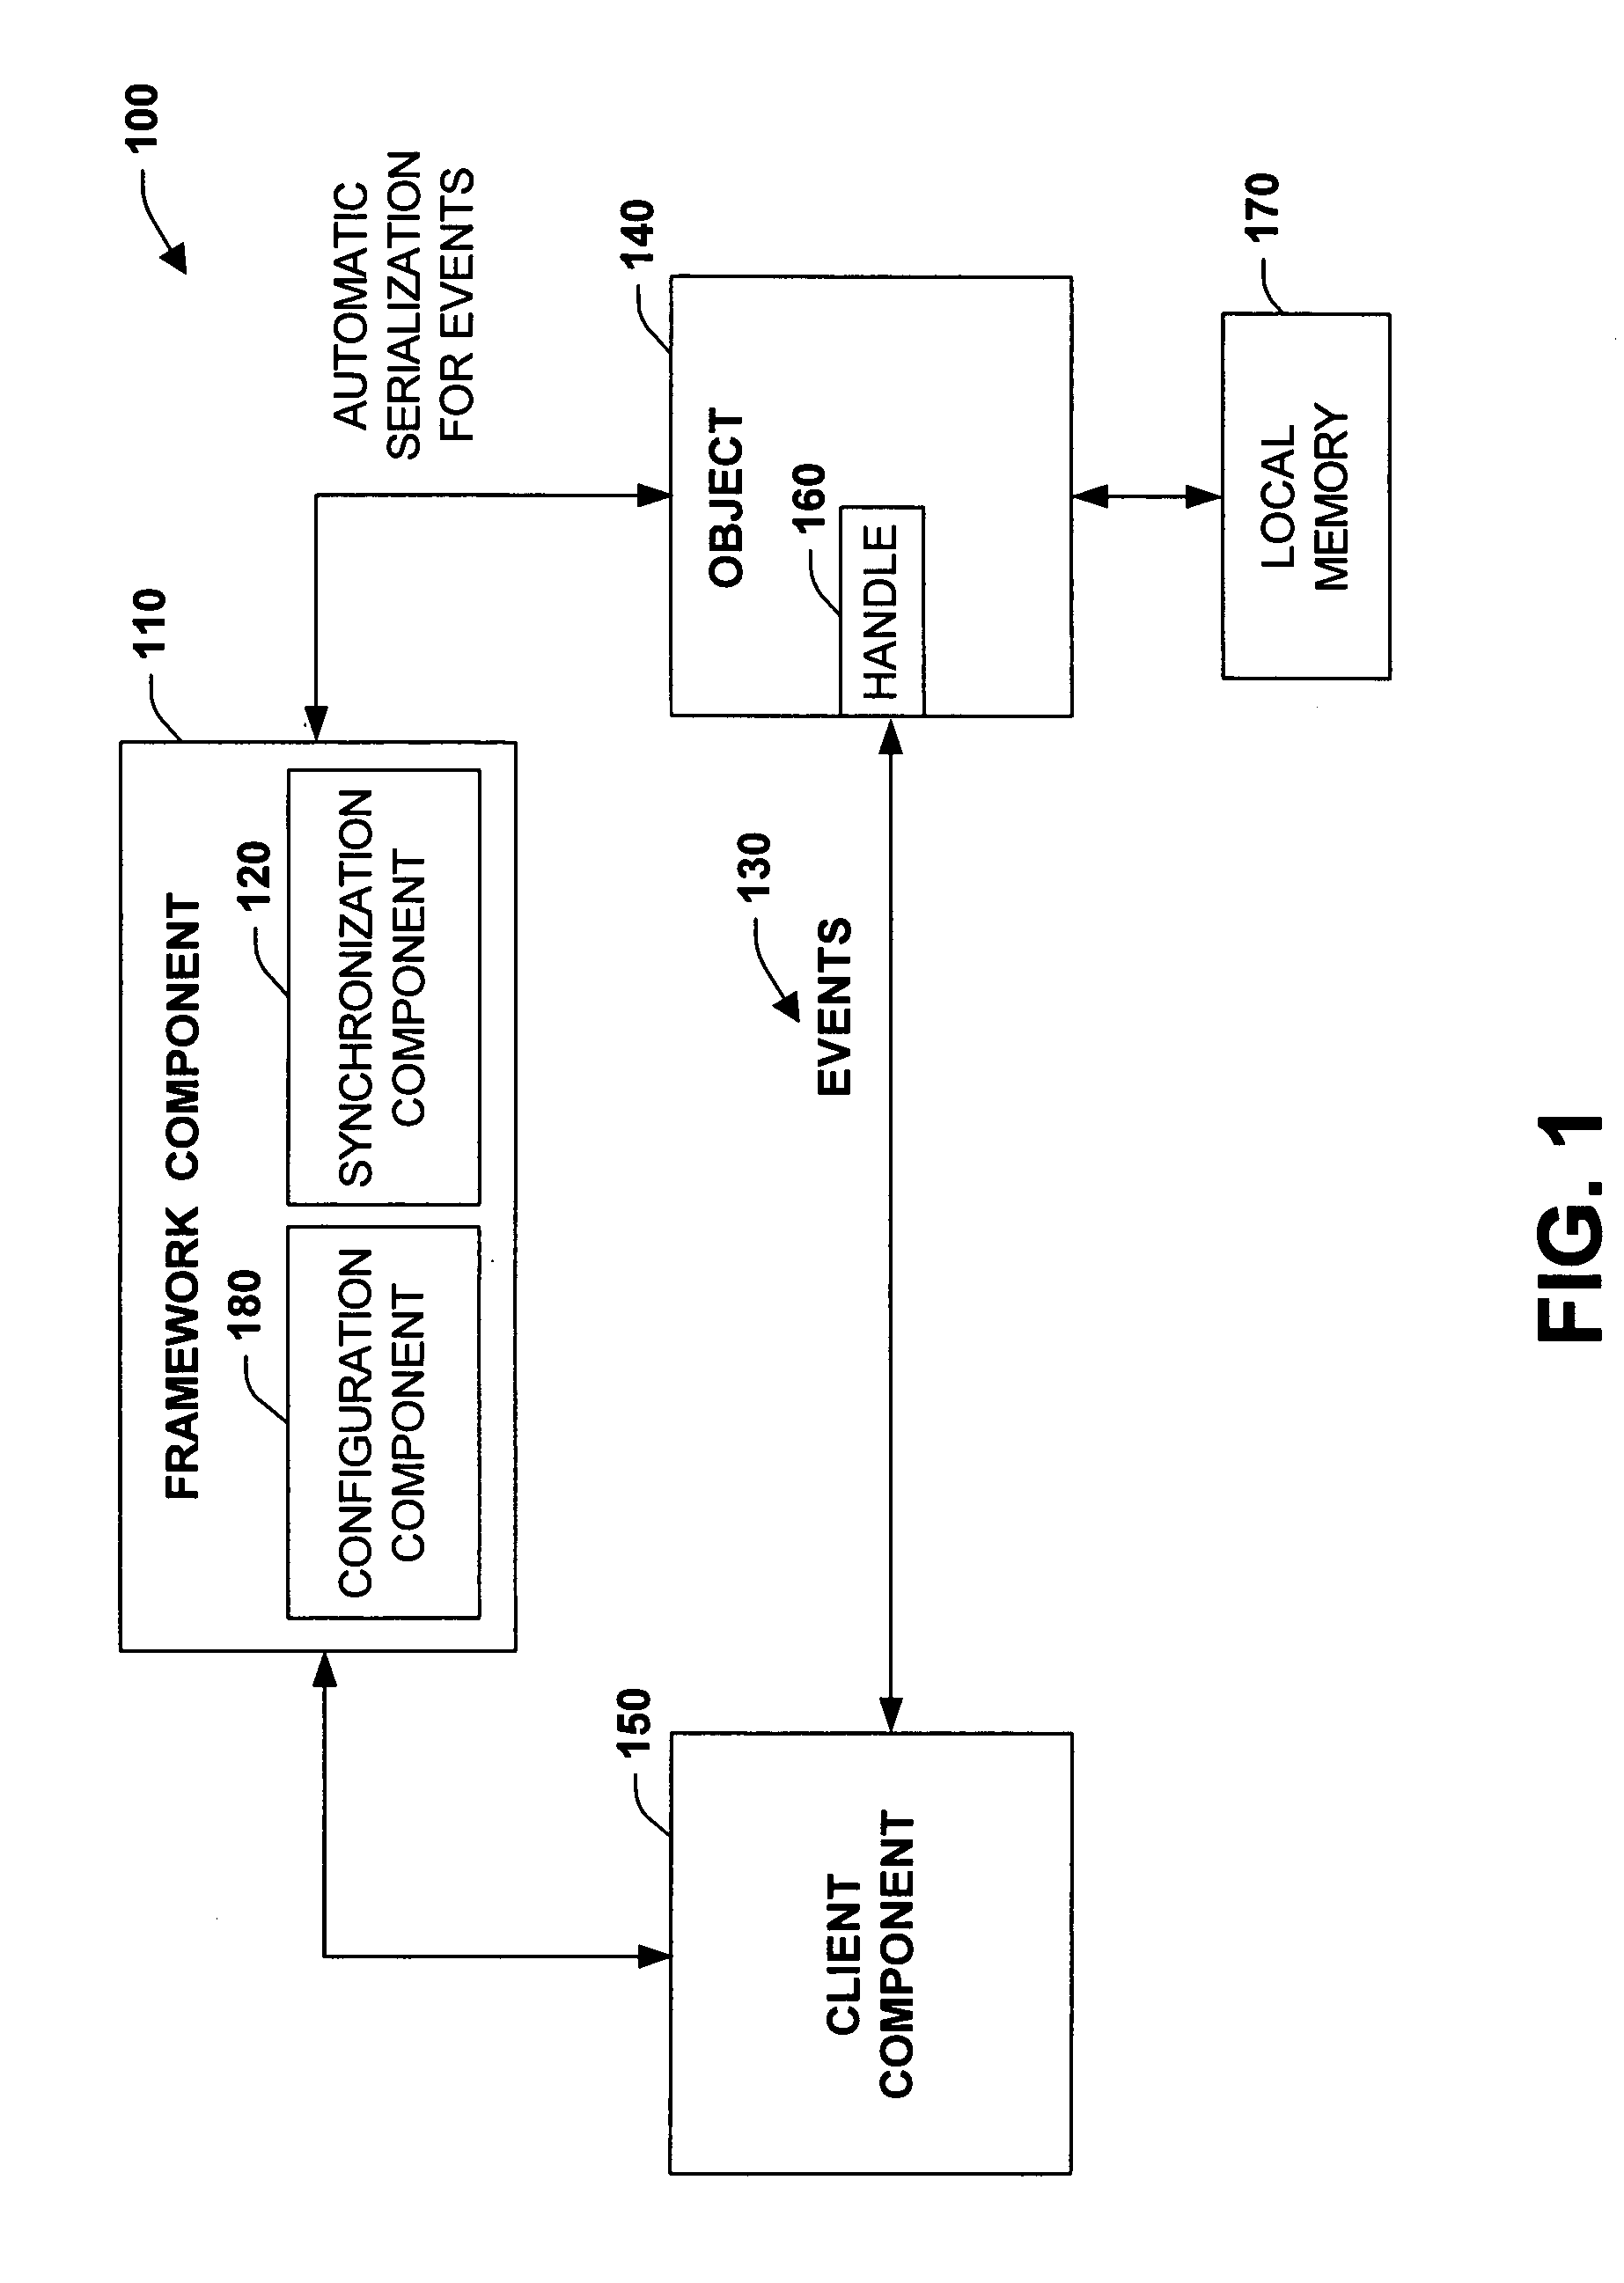 Automatic serialization for event driven multi-threaded programs in an object structured system